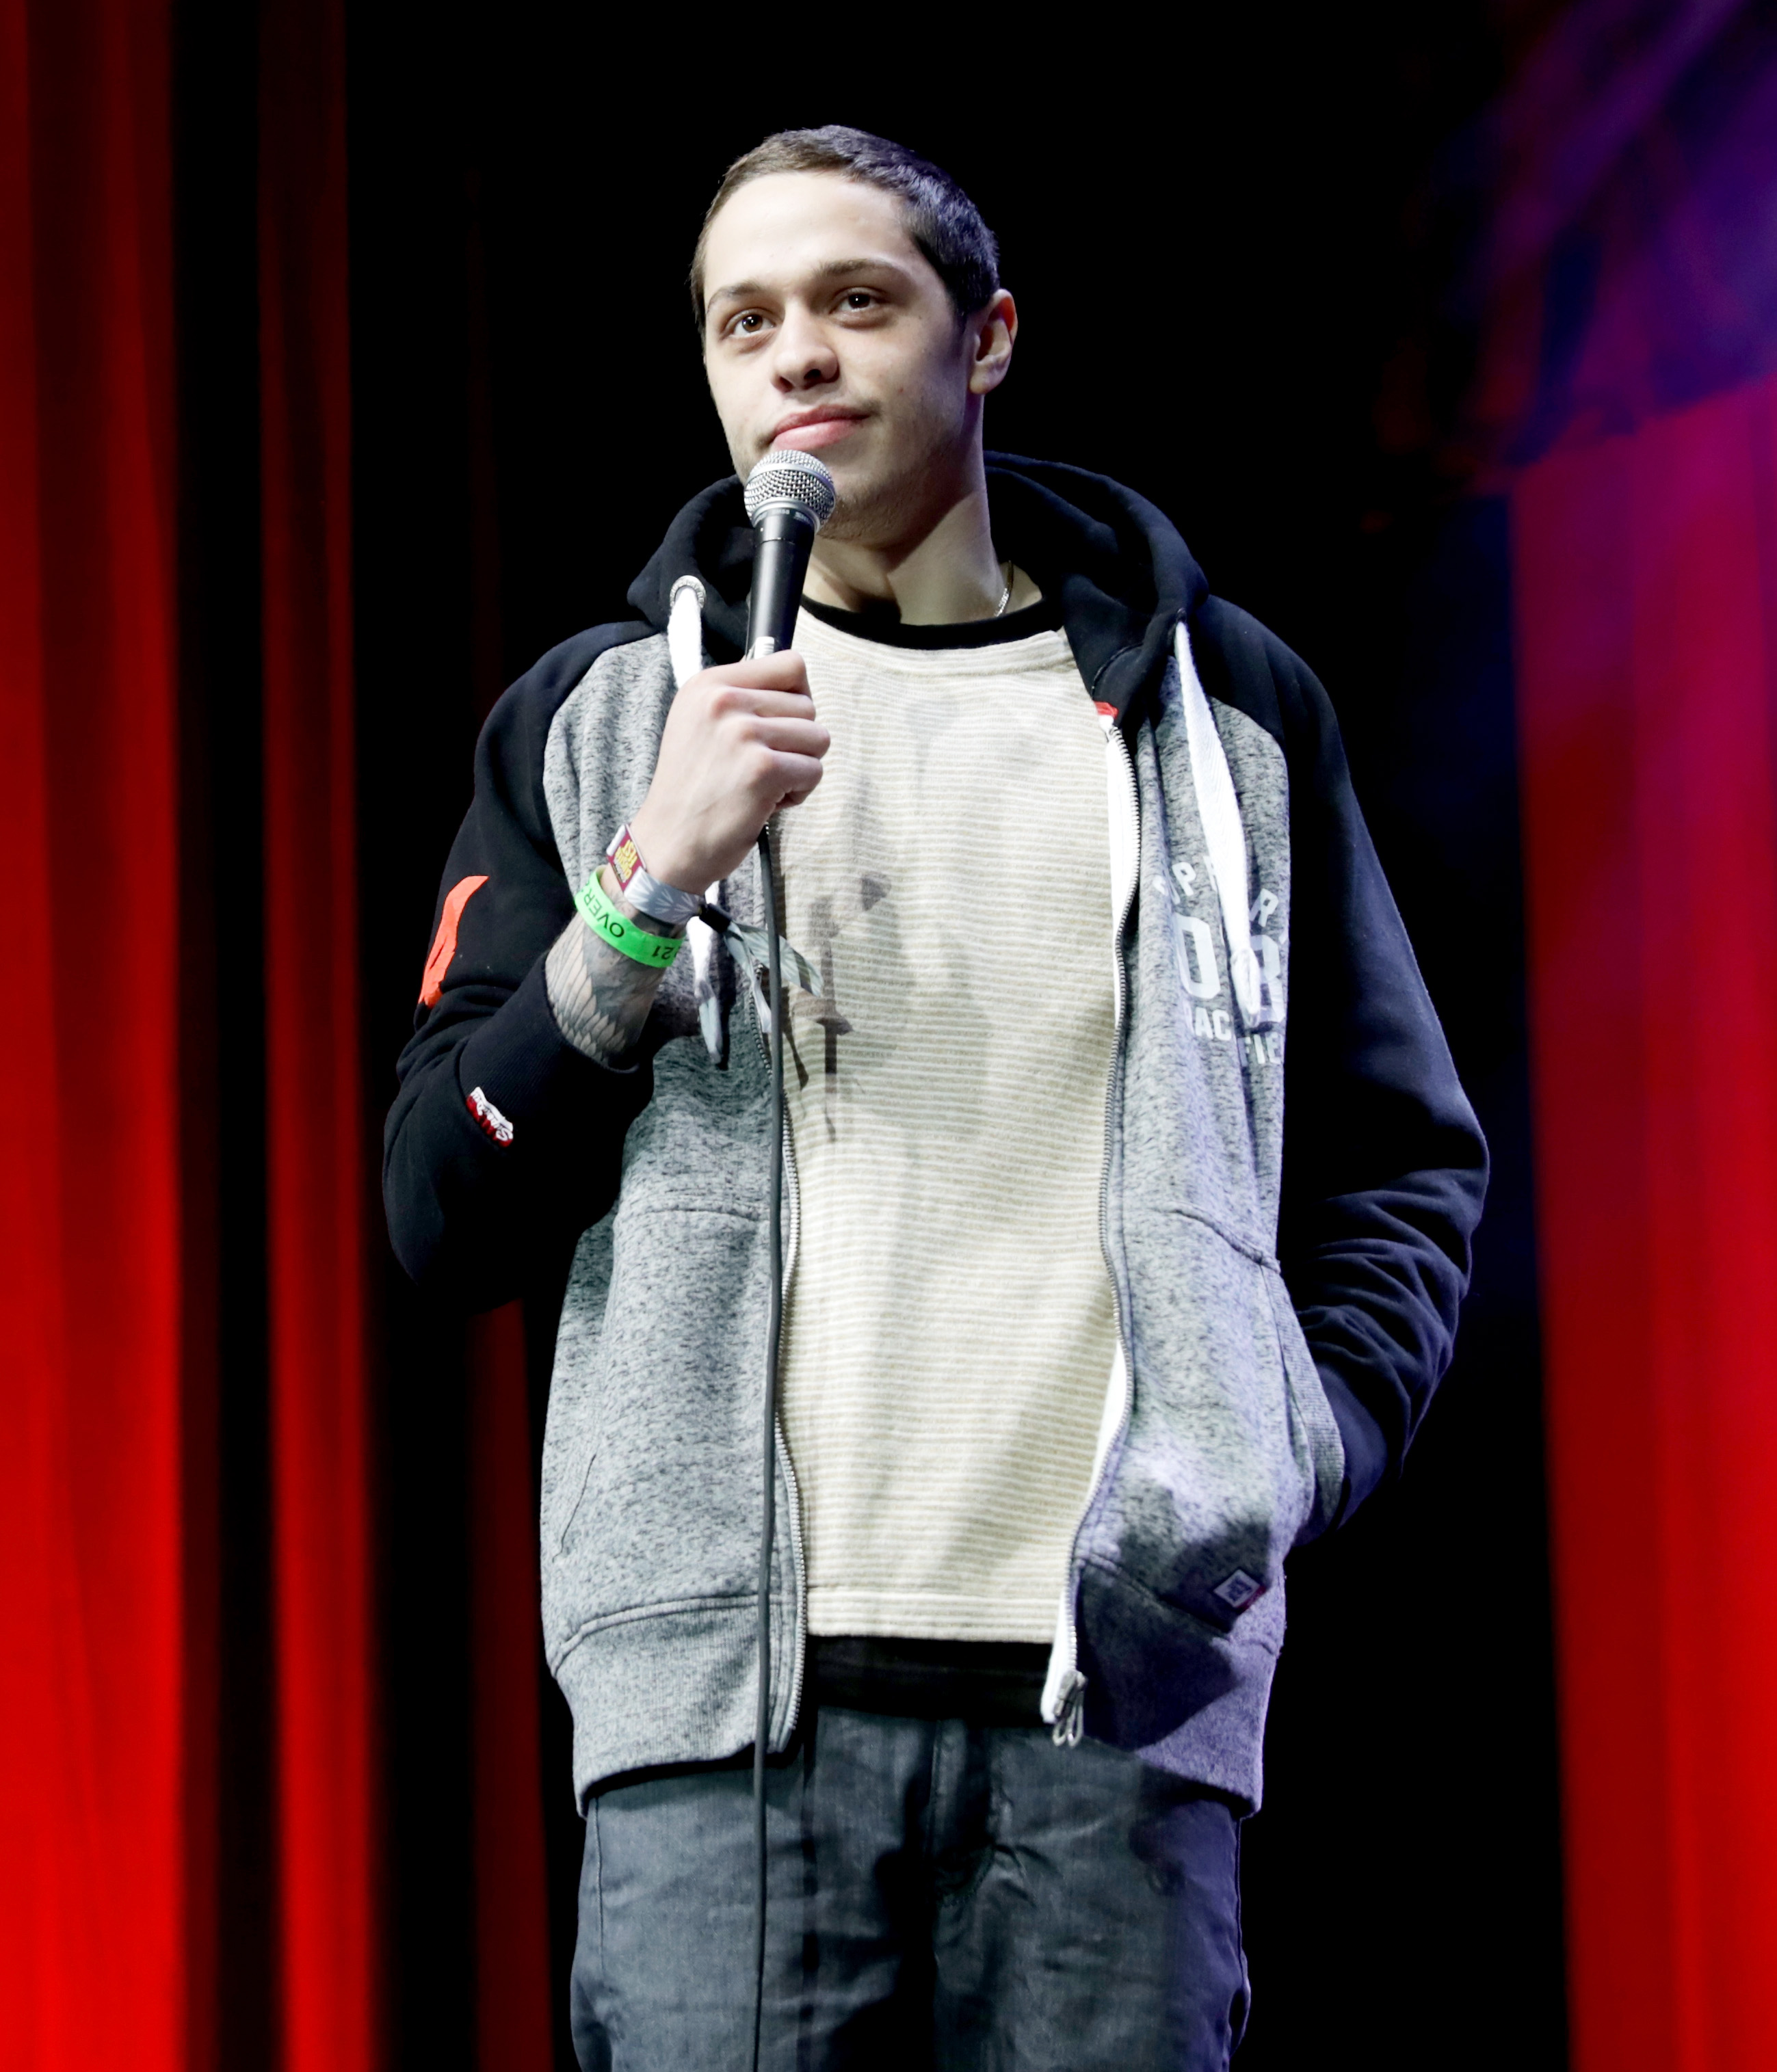 Pete Davidson Reveals He Was High on Ketamine at Aretha Franklin's